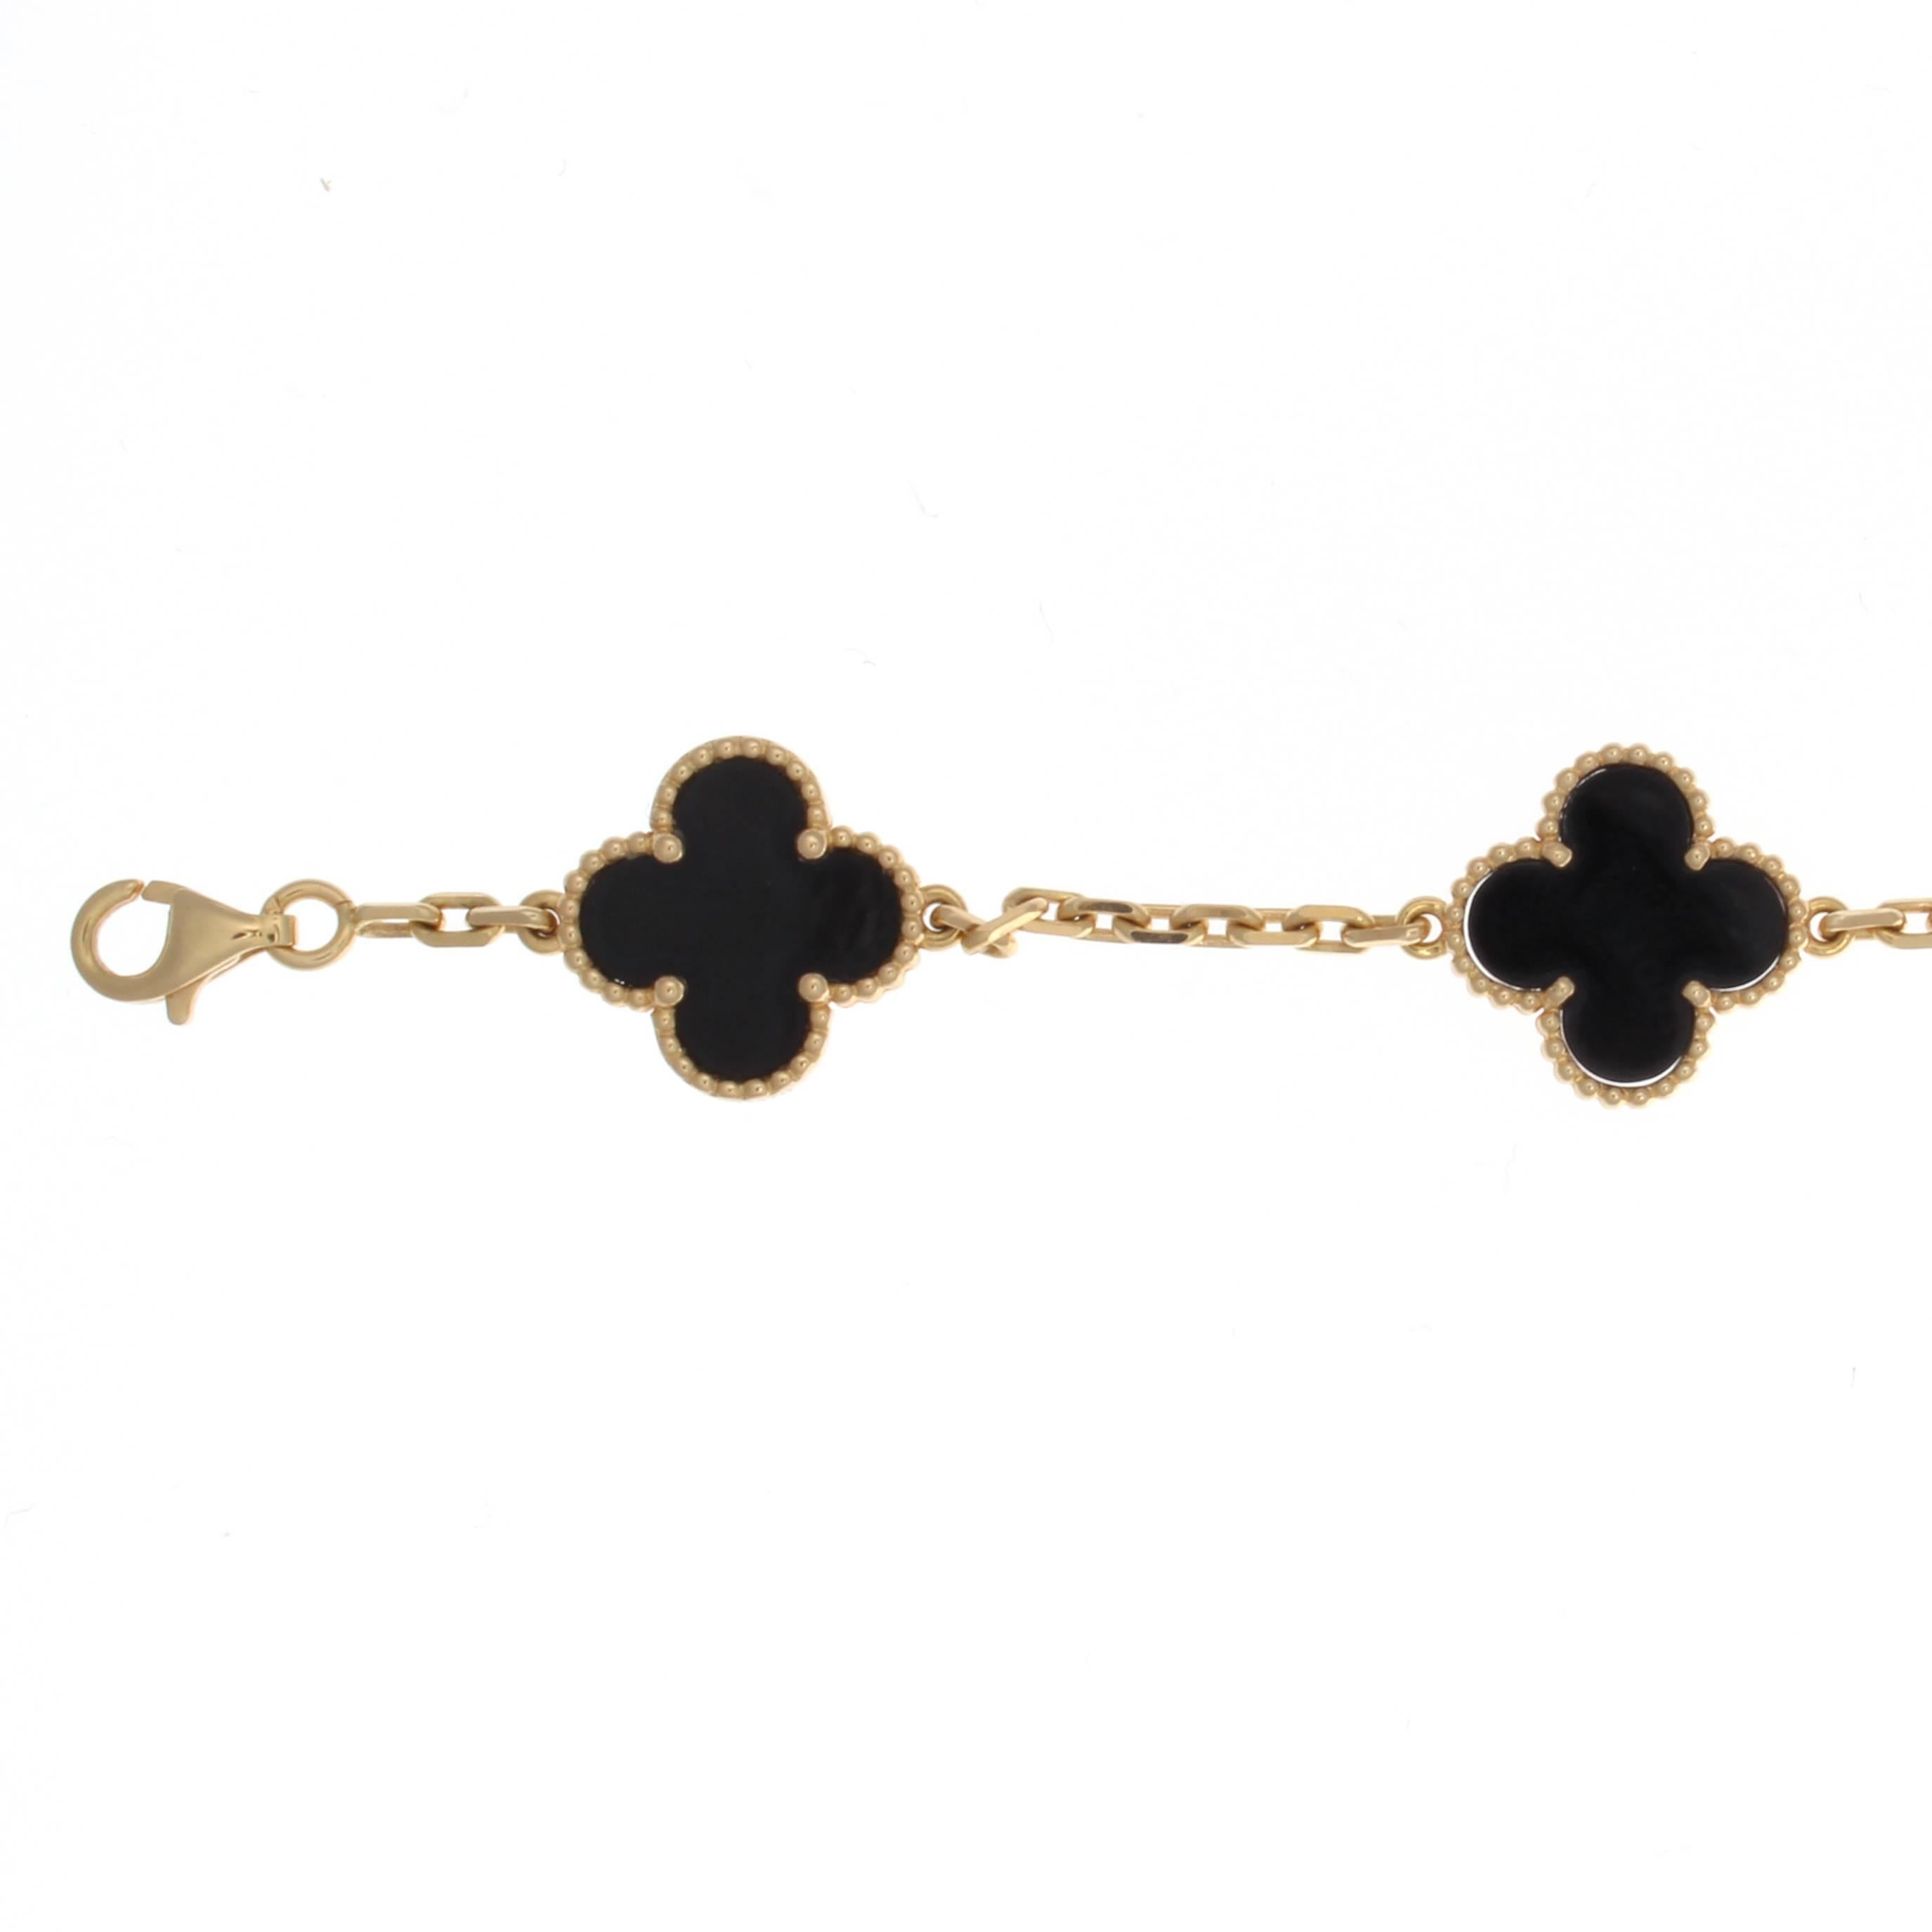 The always desirable and popular Alhambra collection from VCA. This bracelet has been designed with 5 jet black onyx motifs and 18k yellow gold. 

Signed VCA and numbered.